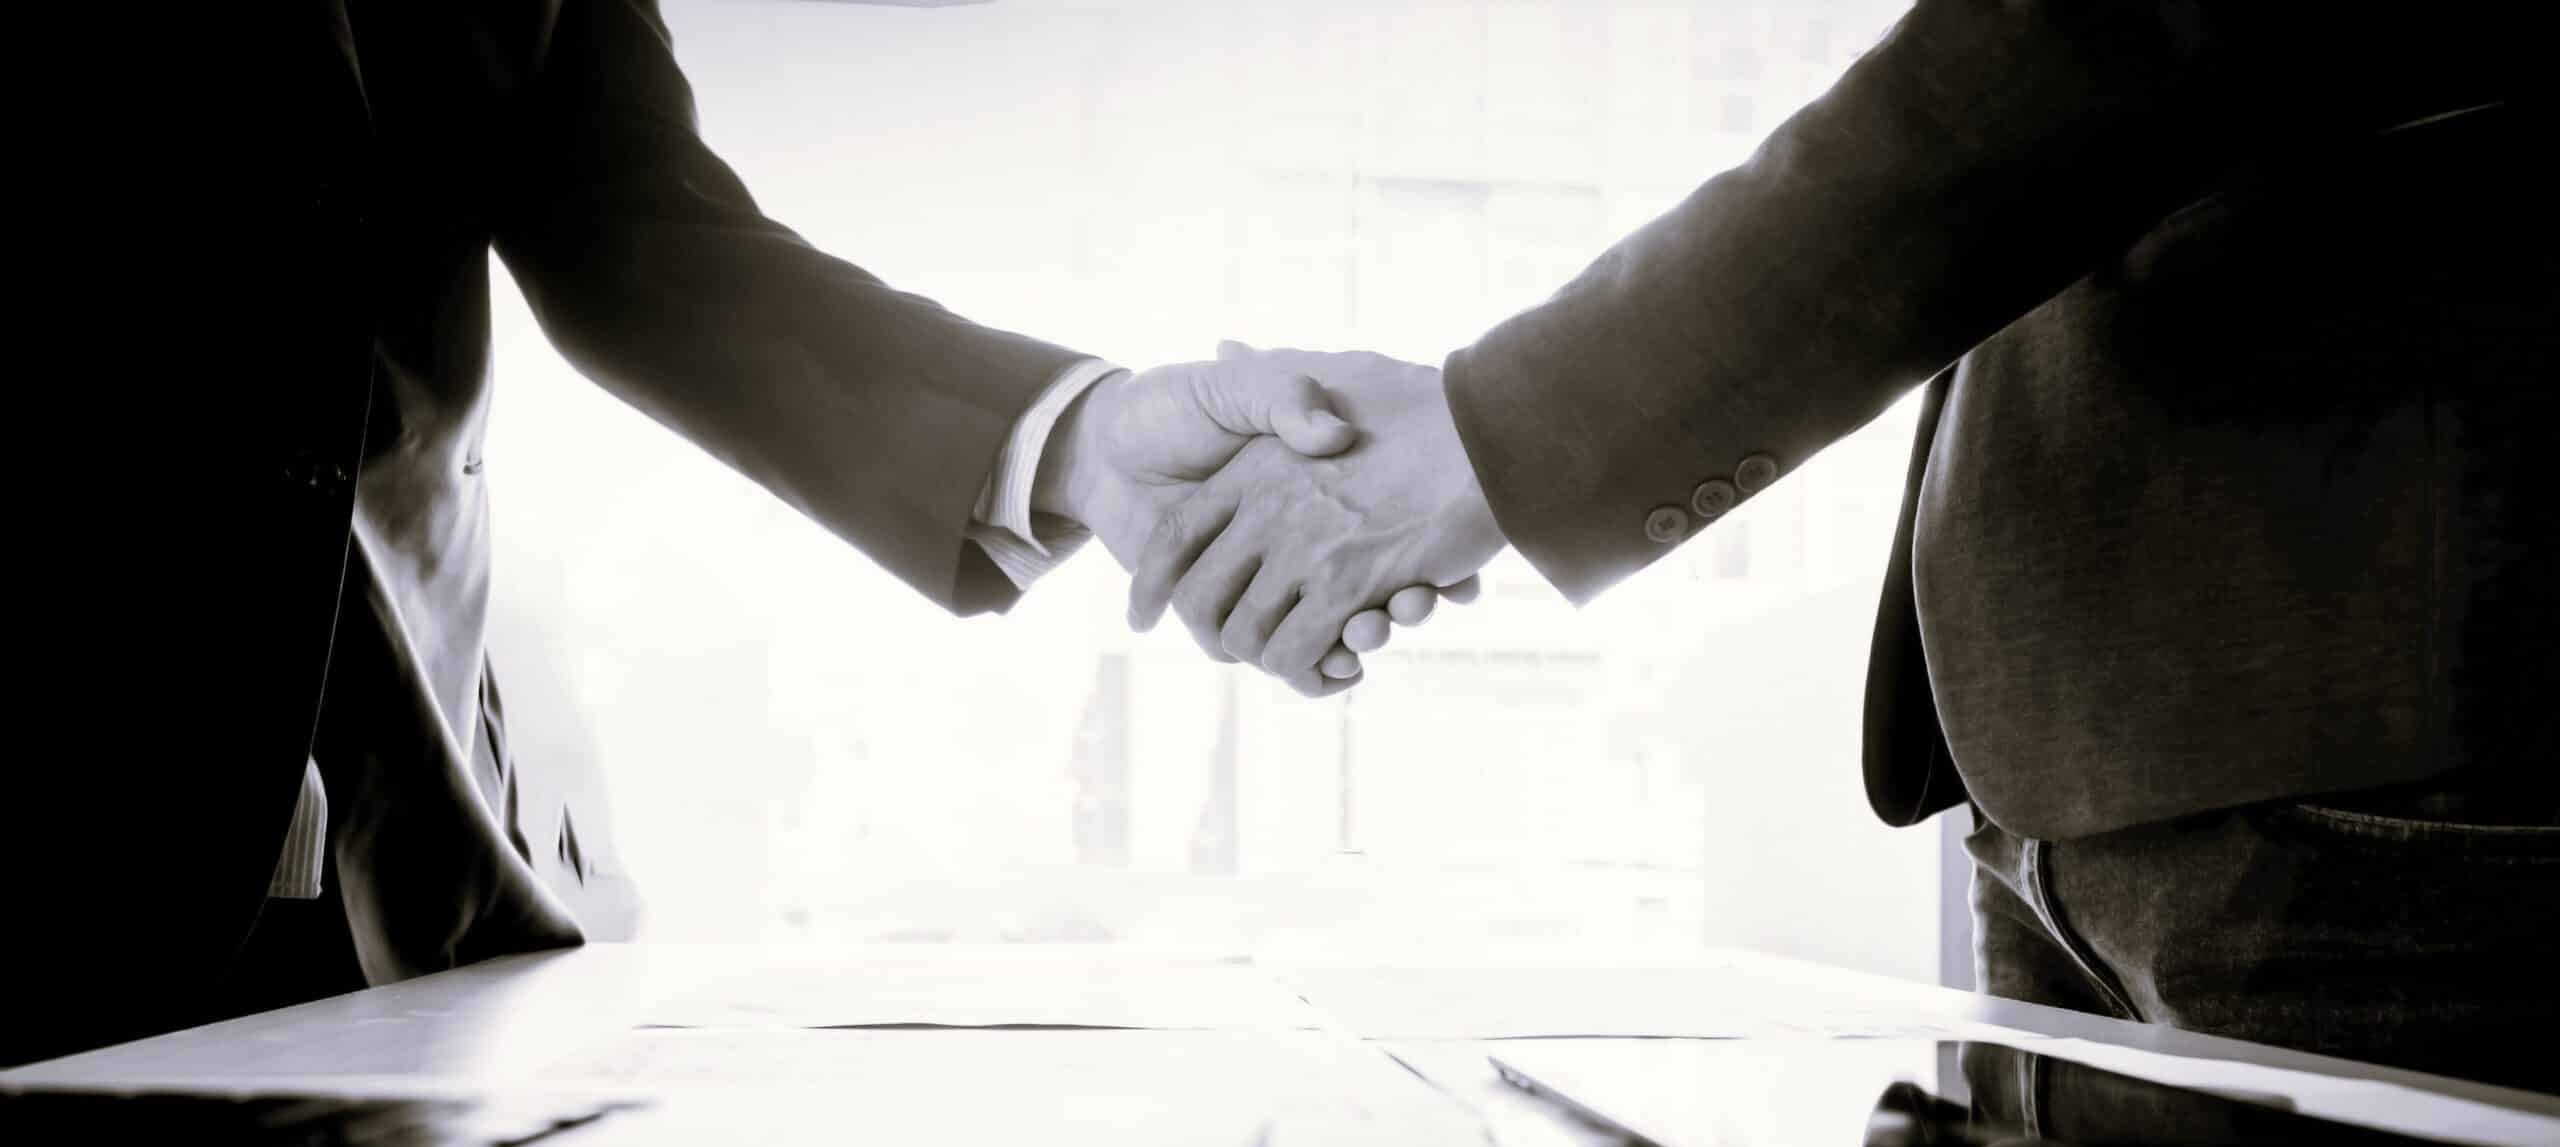 Businessmen shaking hands during a meeting